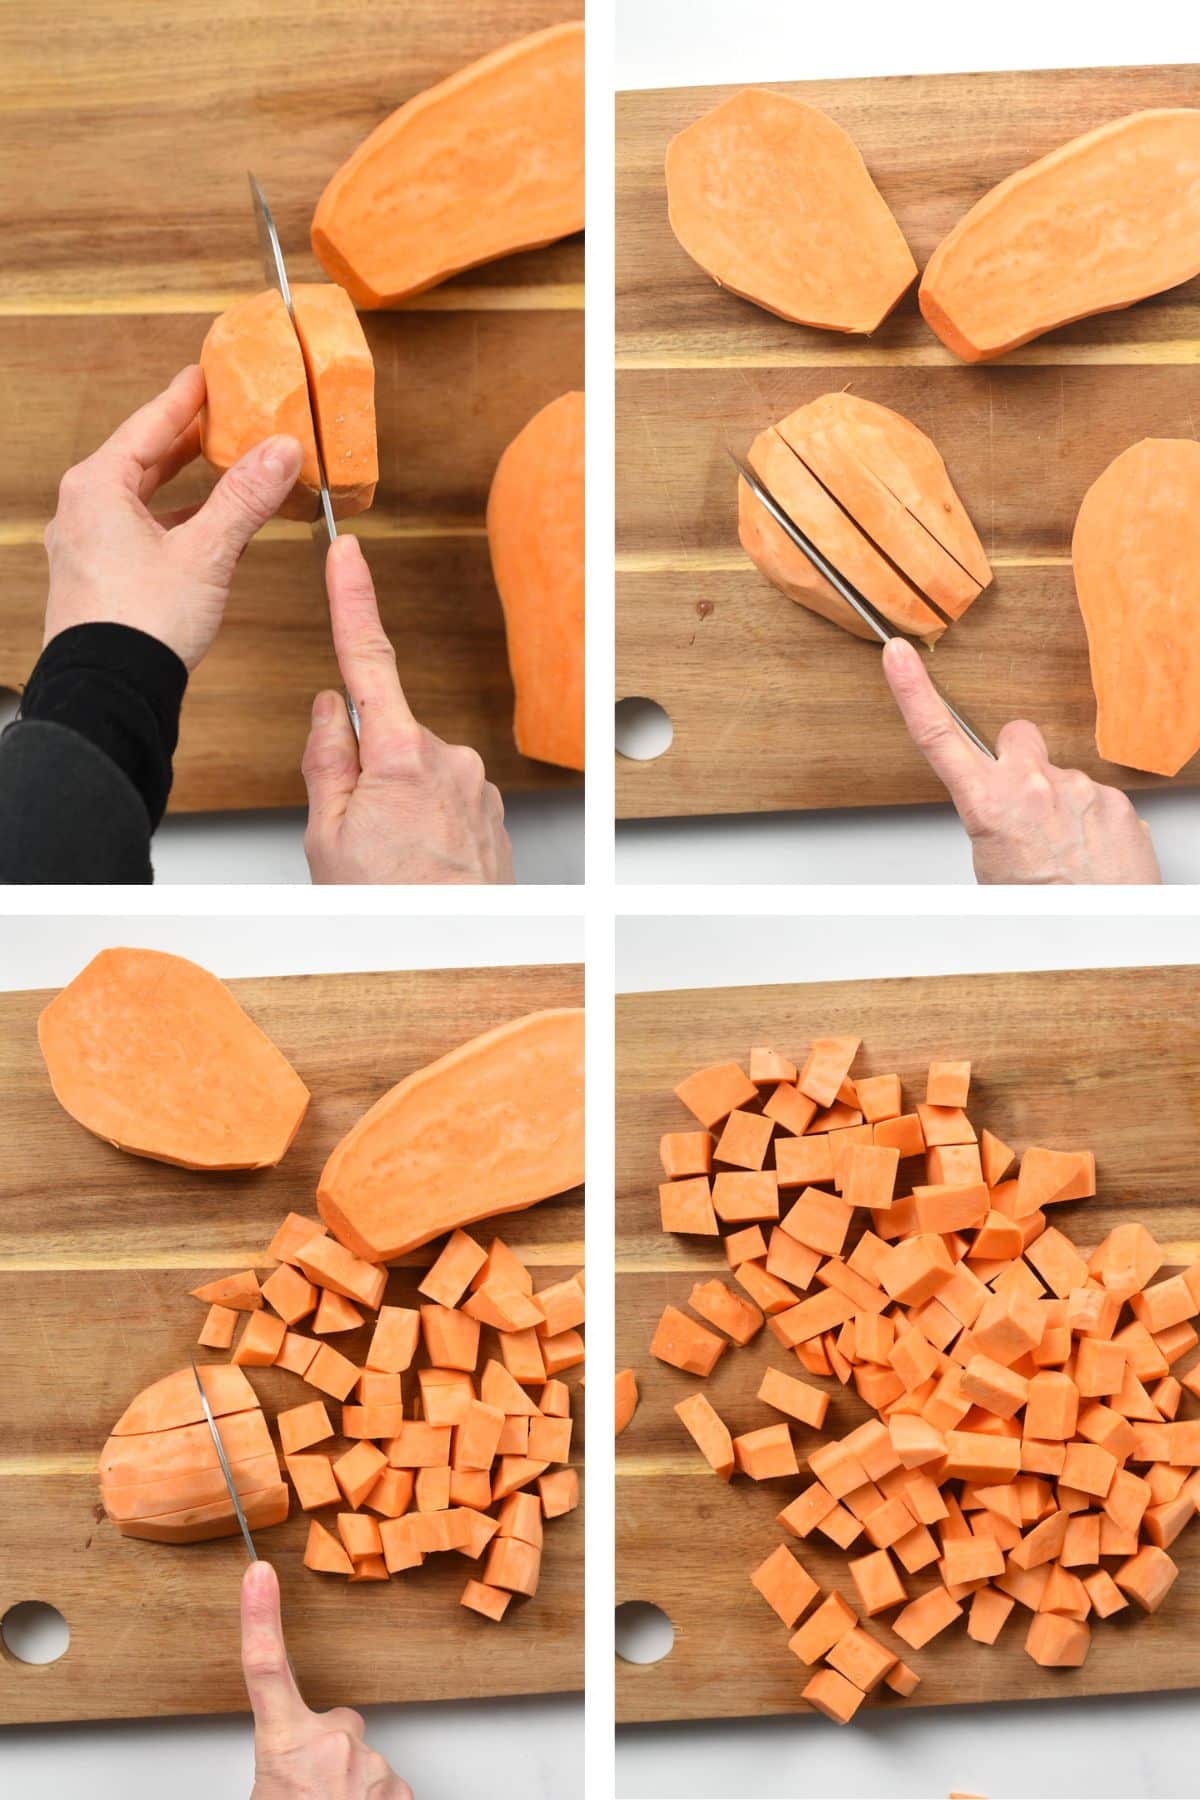 How to cut Sweet Potato into cubes